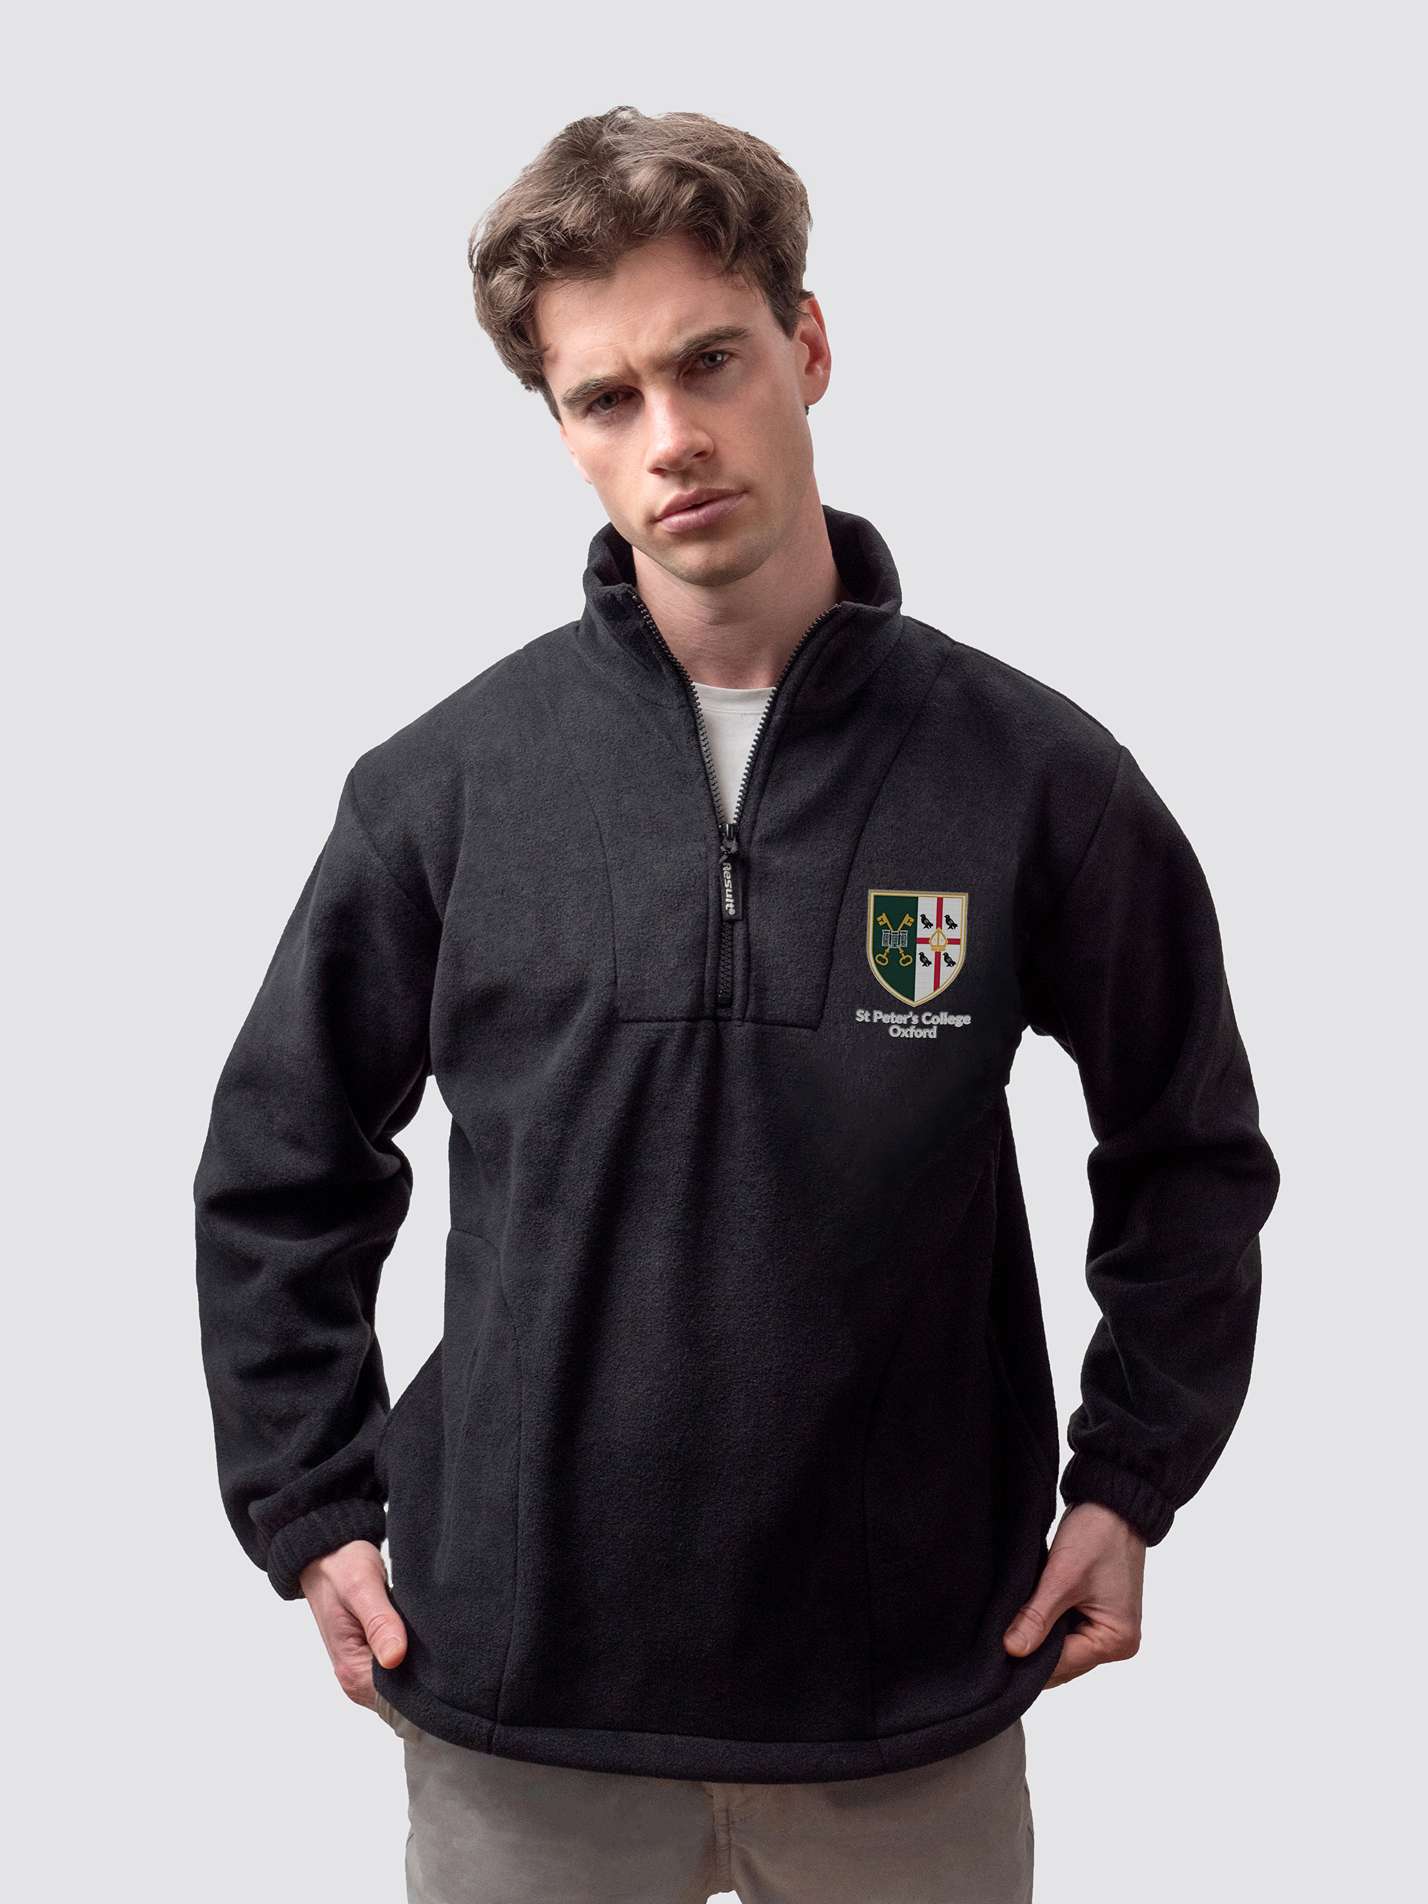 Oxford university fleece, with custom embroidered initials and St Peter's crest